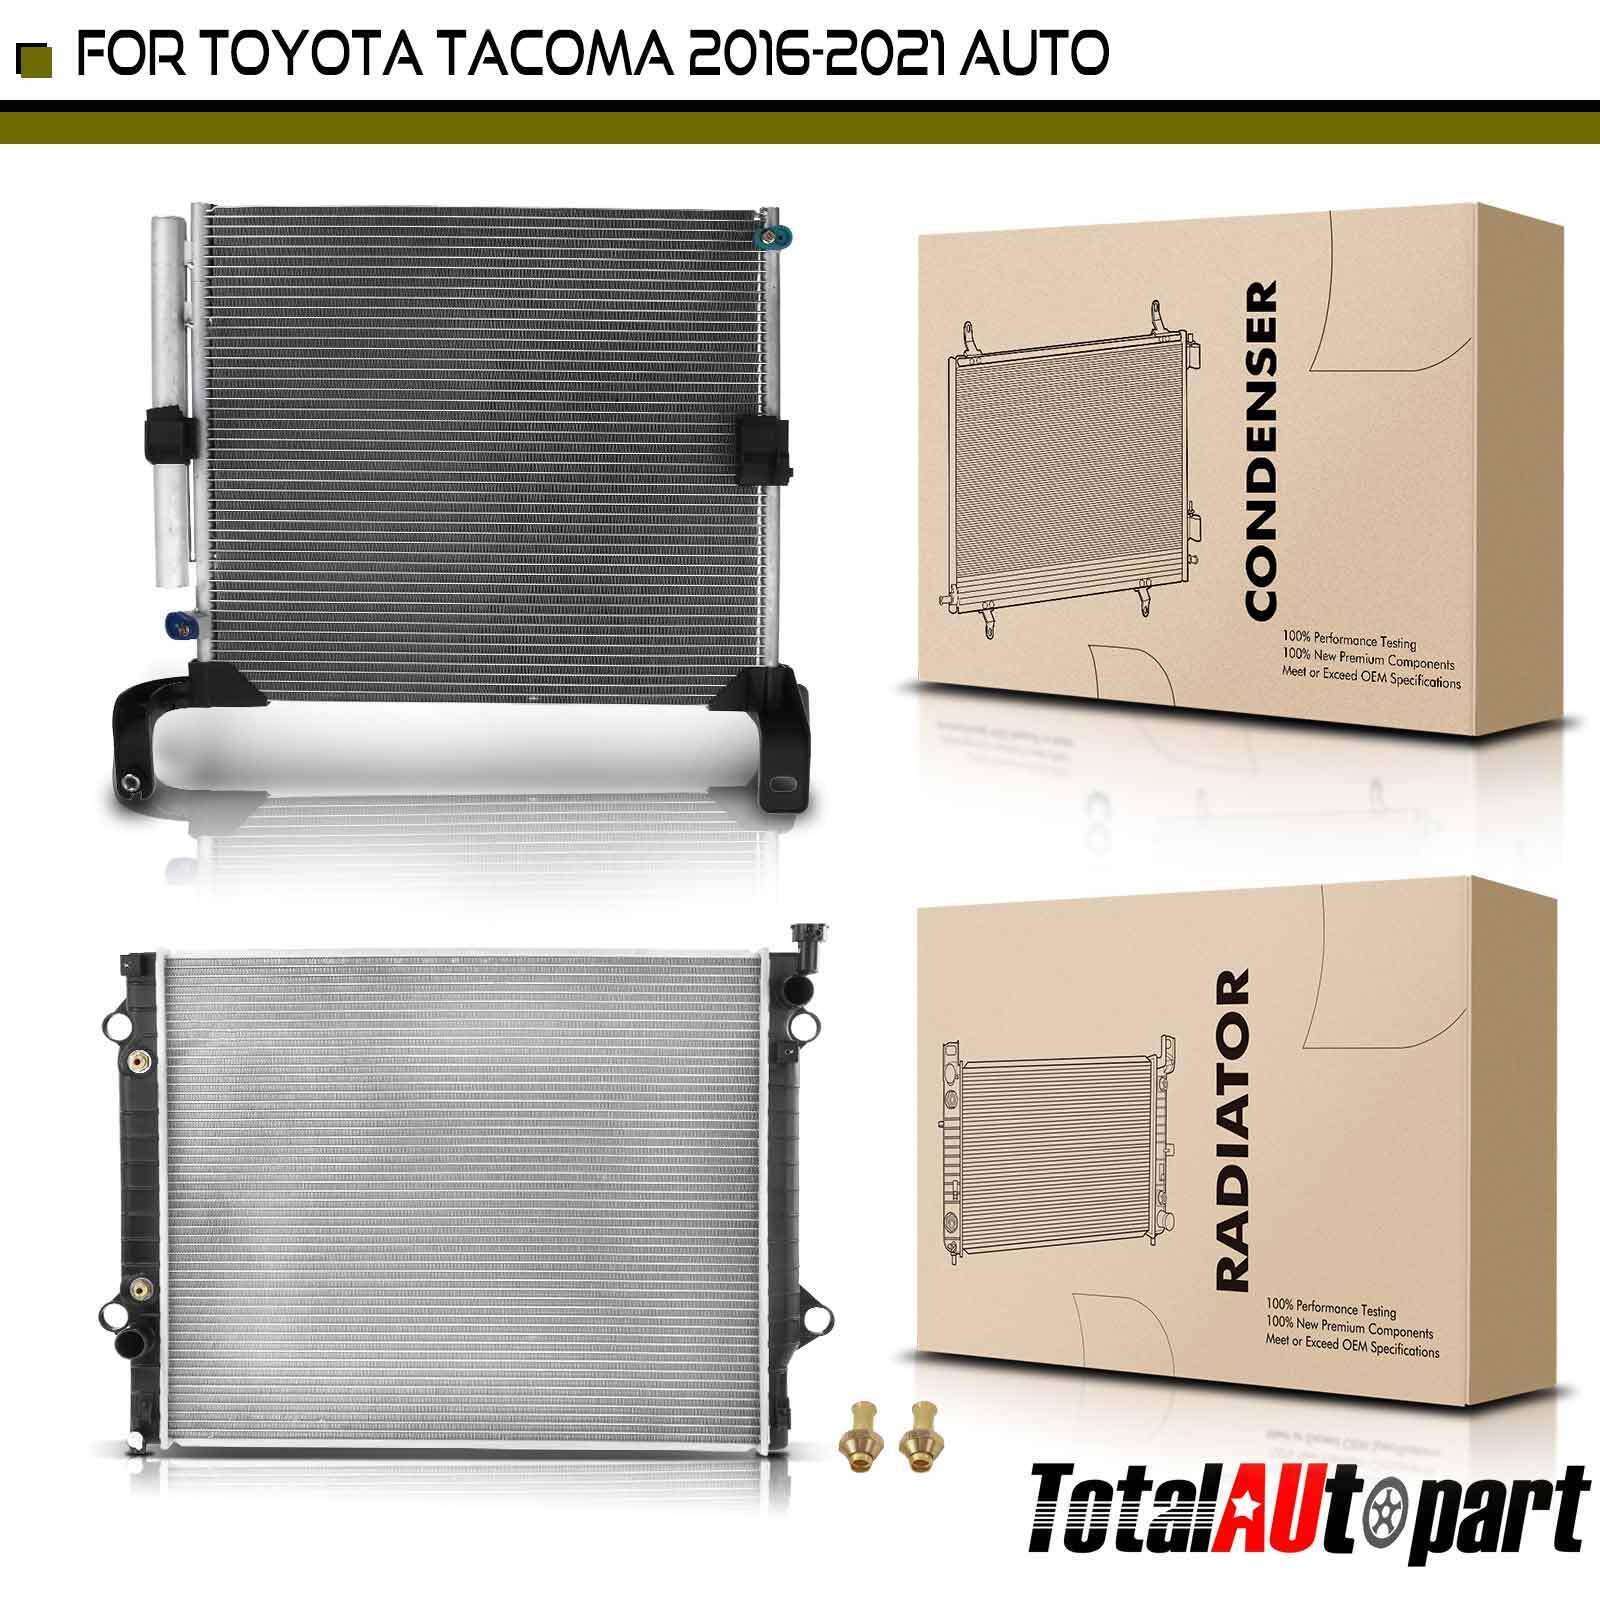 New 2x Aluminum Radiator & AC Condenser Cooling Kit for Toyota Tacoma 2016-2021 